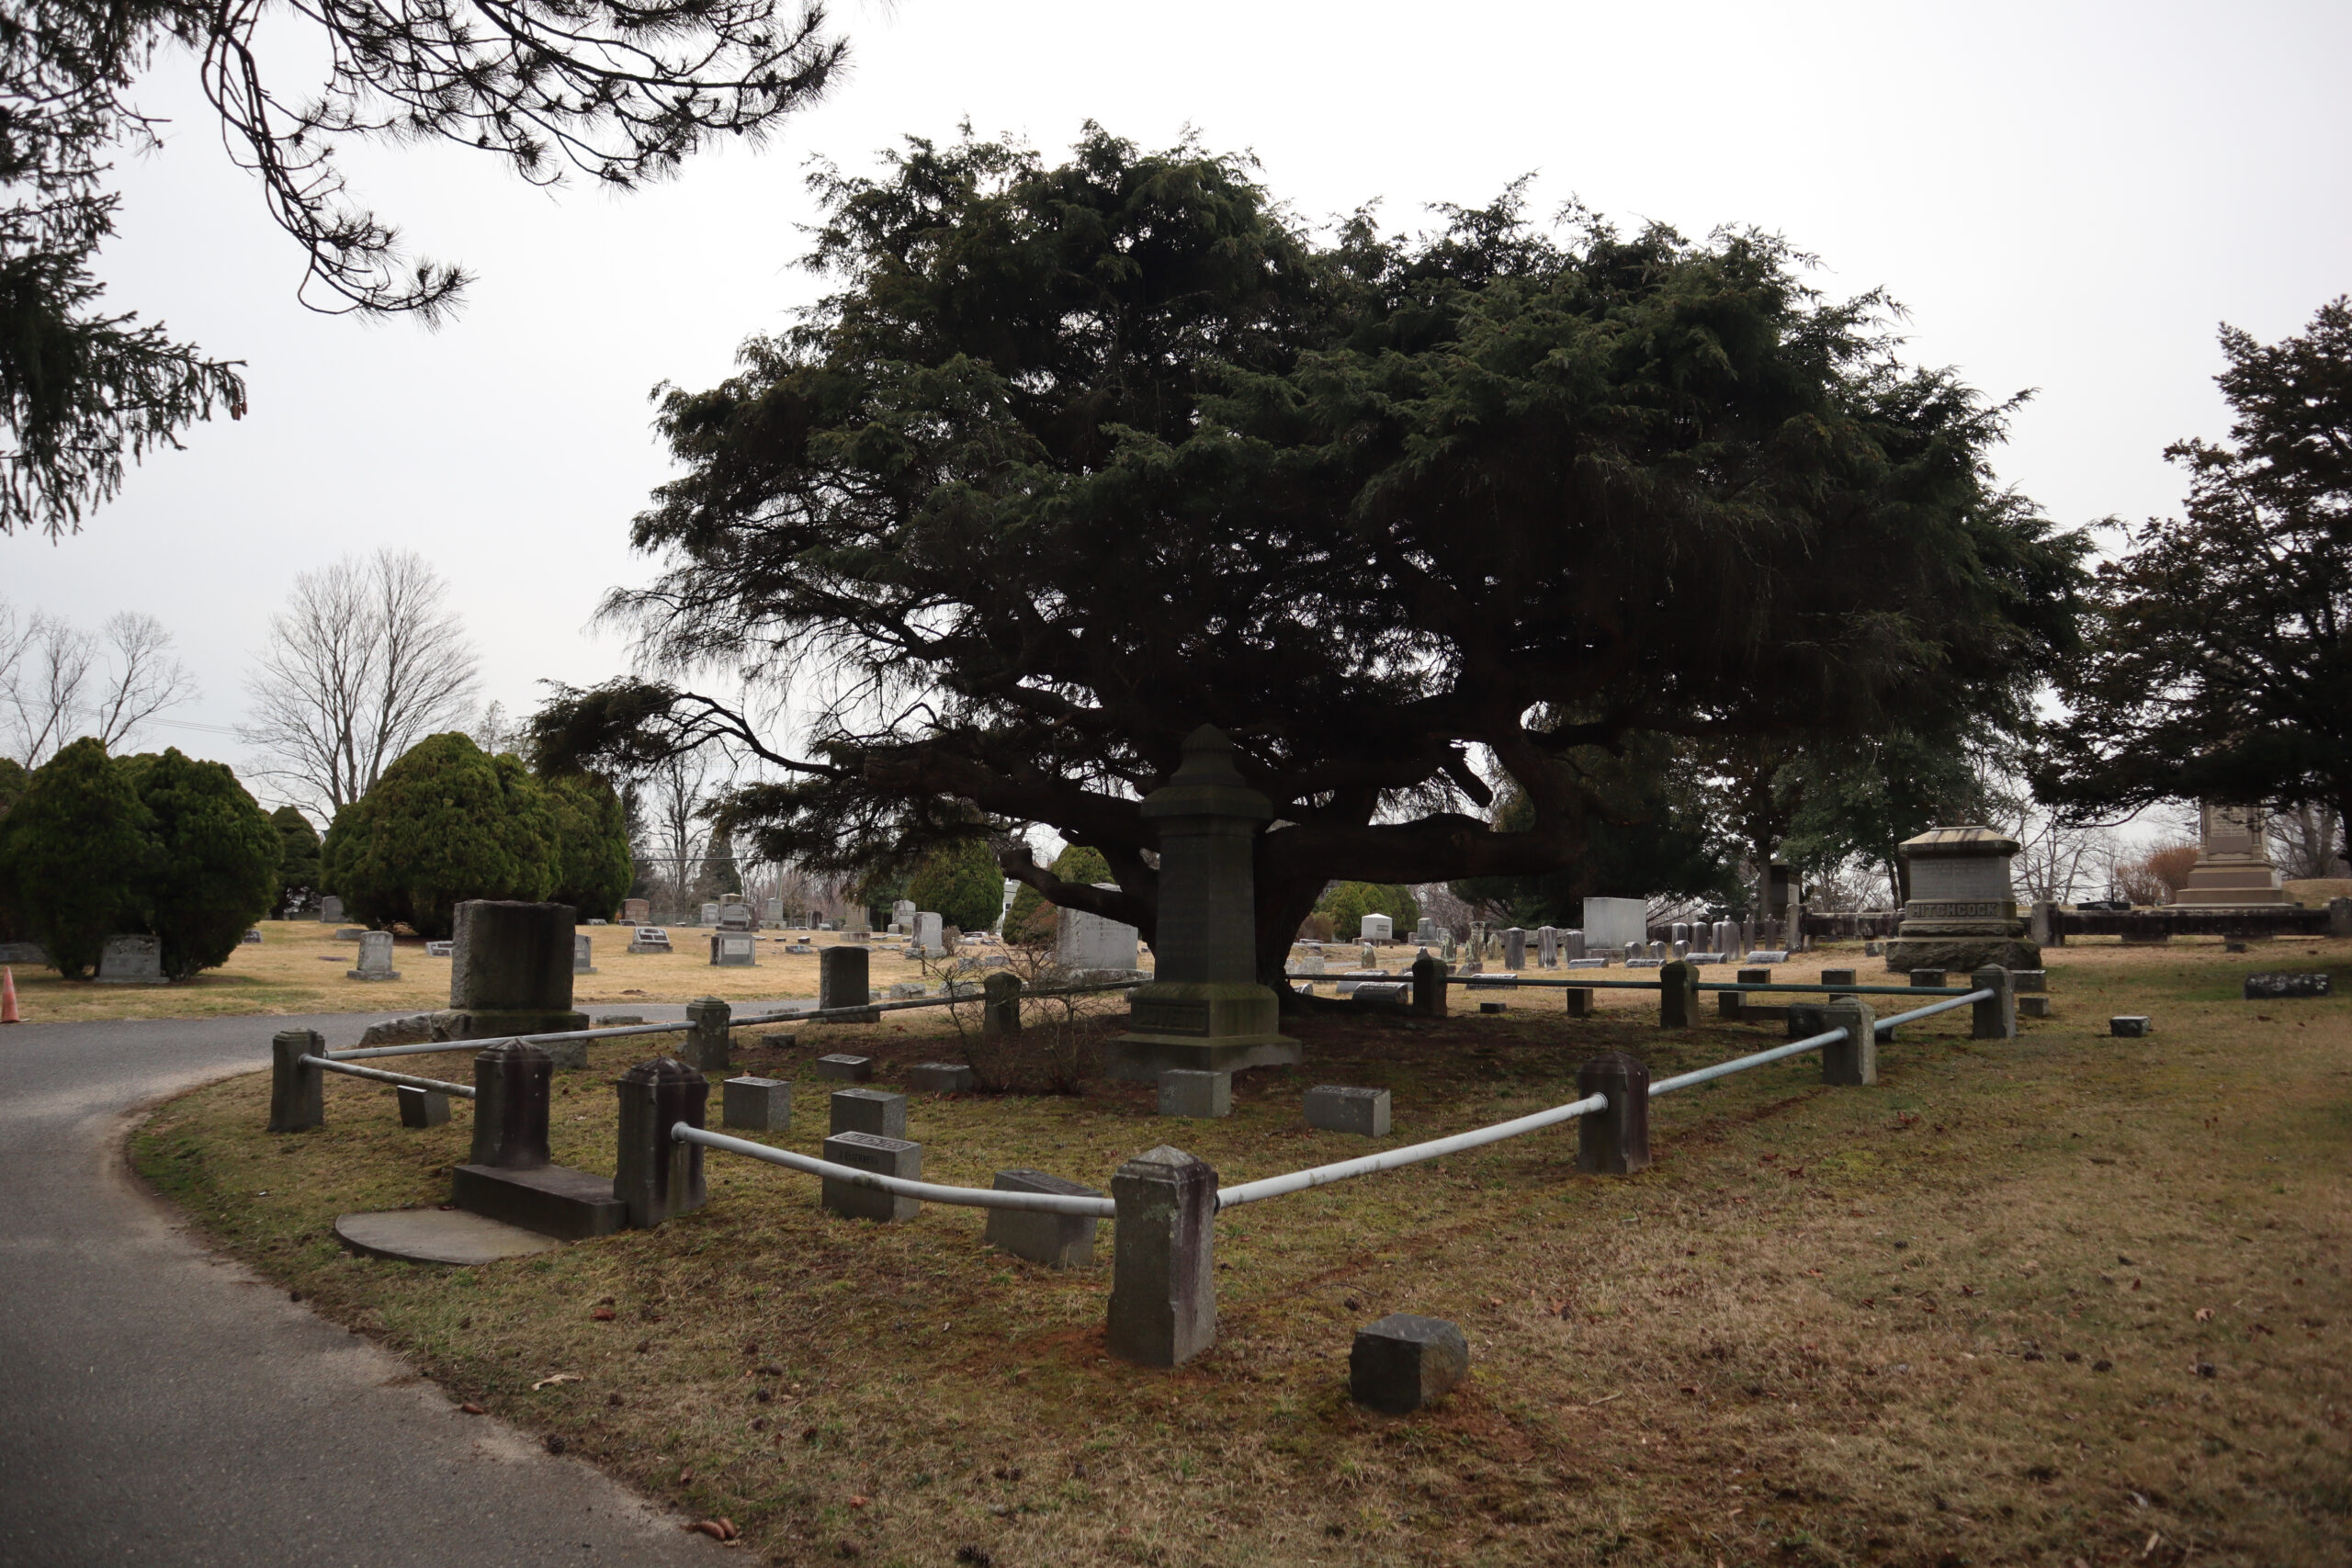 The Lovett family plot at Fair View Cemetery in Middletown has the remains of John T. Lovett and his wife Julia, and their three sons and three daughters. Photo credit John R. Barrows